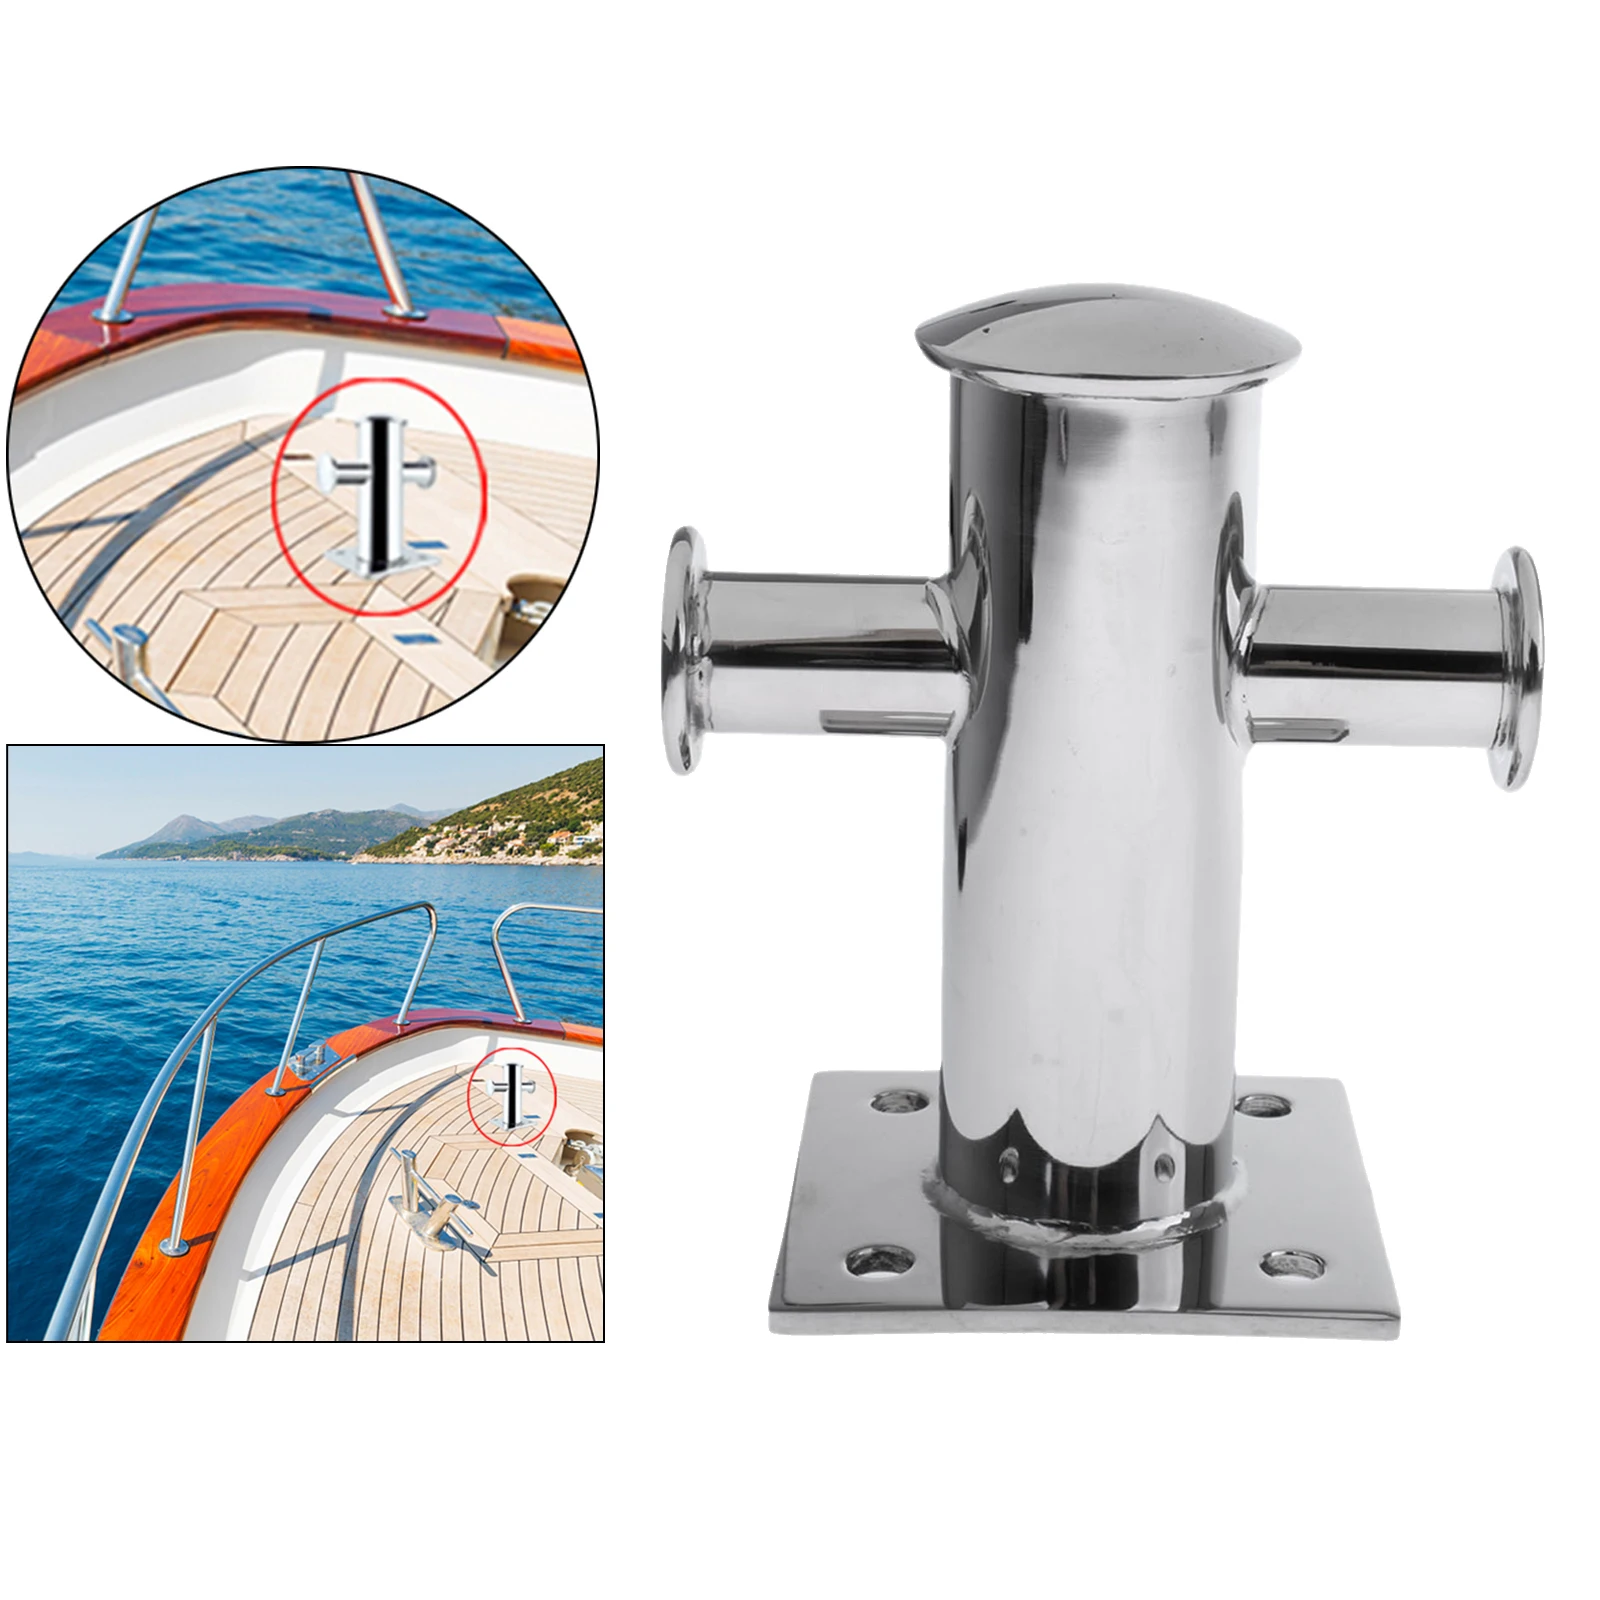 

Heavy Duty 304 Stainless Steel Single Mooring Bitt Cross Bollard Cleat with Base Plate Replacement Replace 1pc